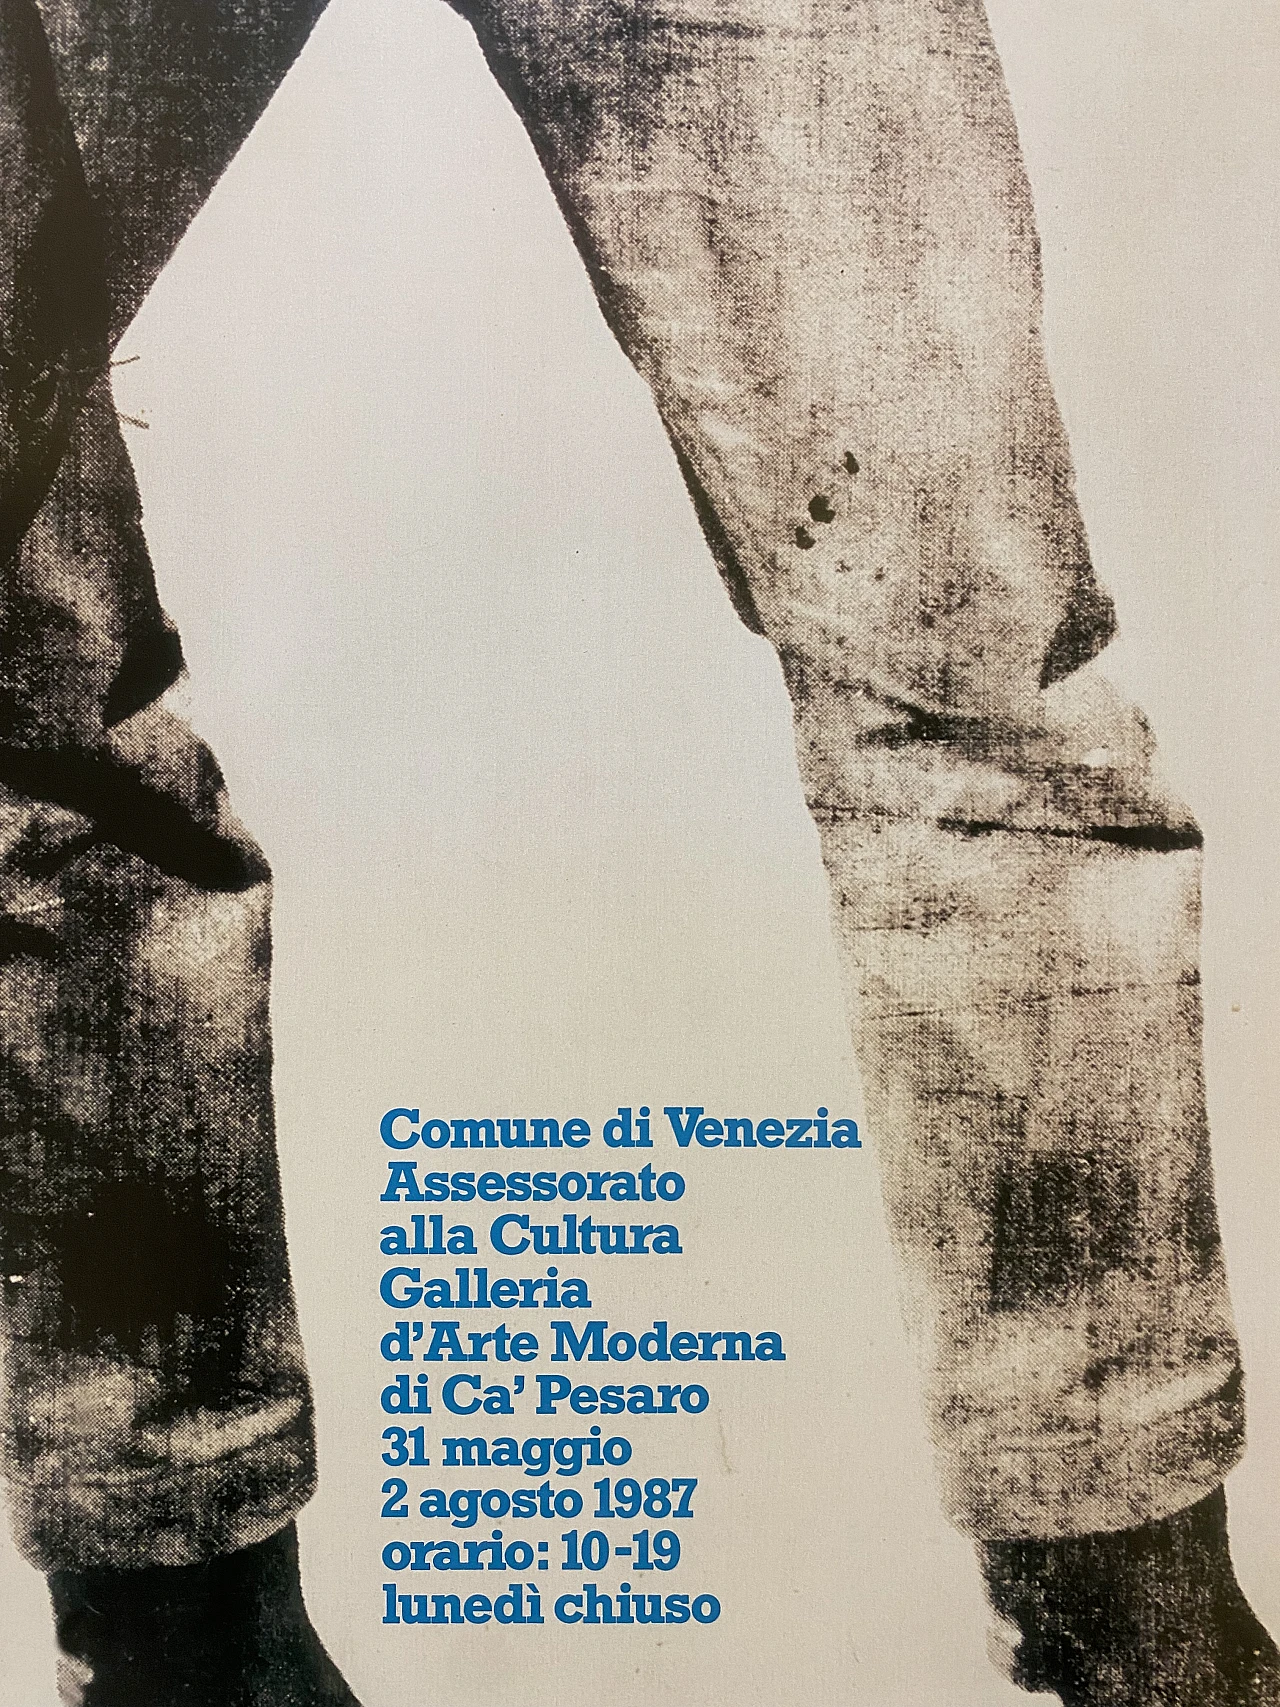 Andy Warhol and Marcello Francone, Arte americana, poster, 1987 2